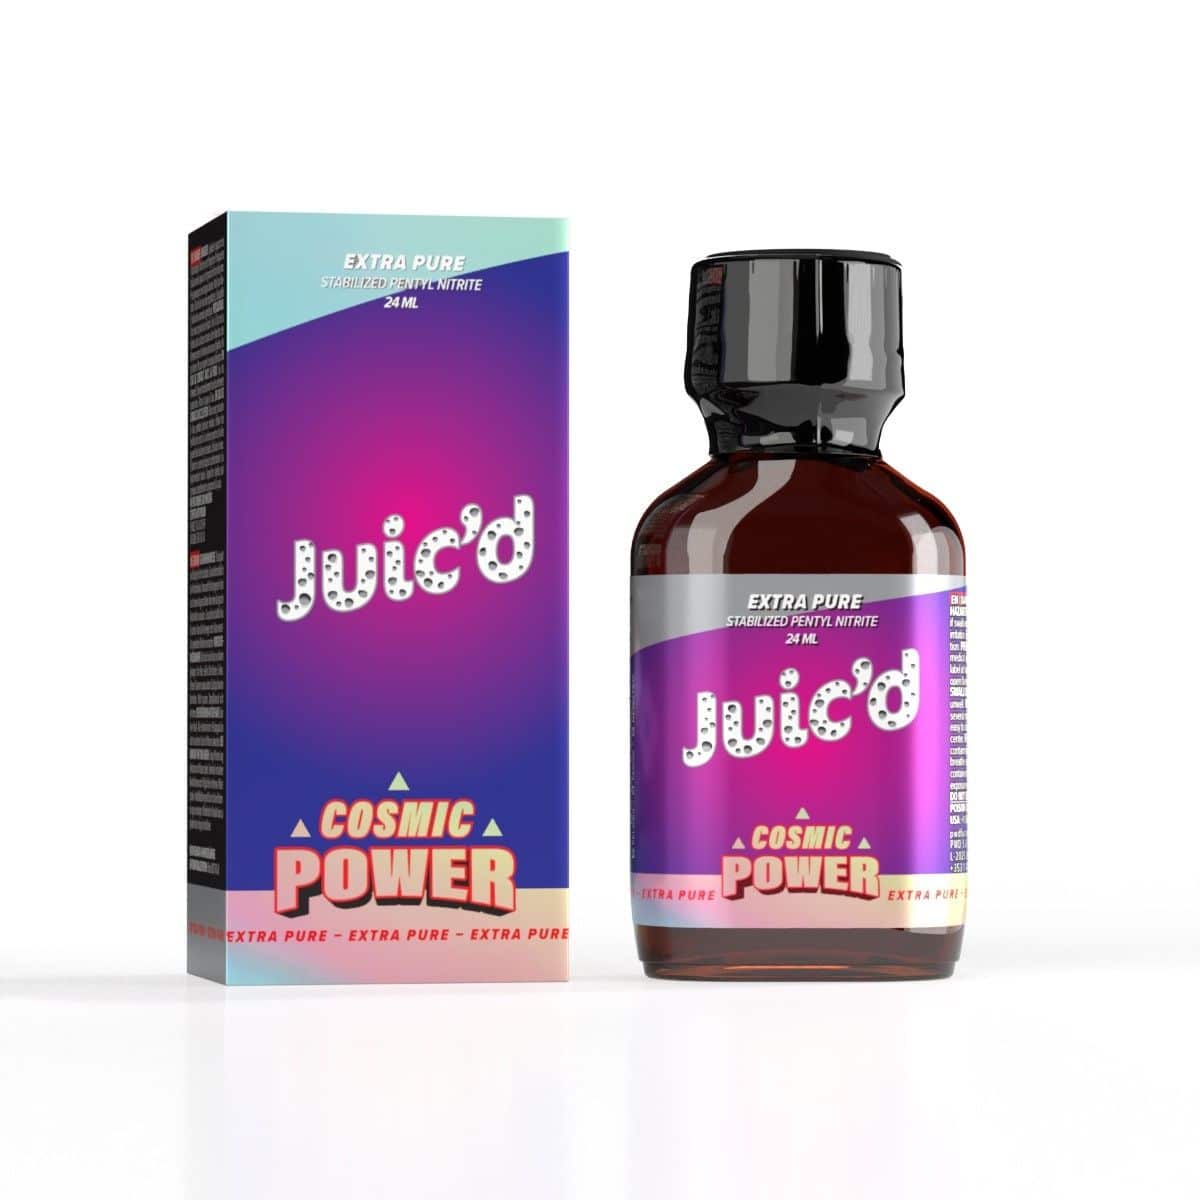 Juic'd Cosmic Power Pentyl: a cosmic power energy drink - unleash your potential with our extra pure, pentyl-infused, vitality-boosting formula!